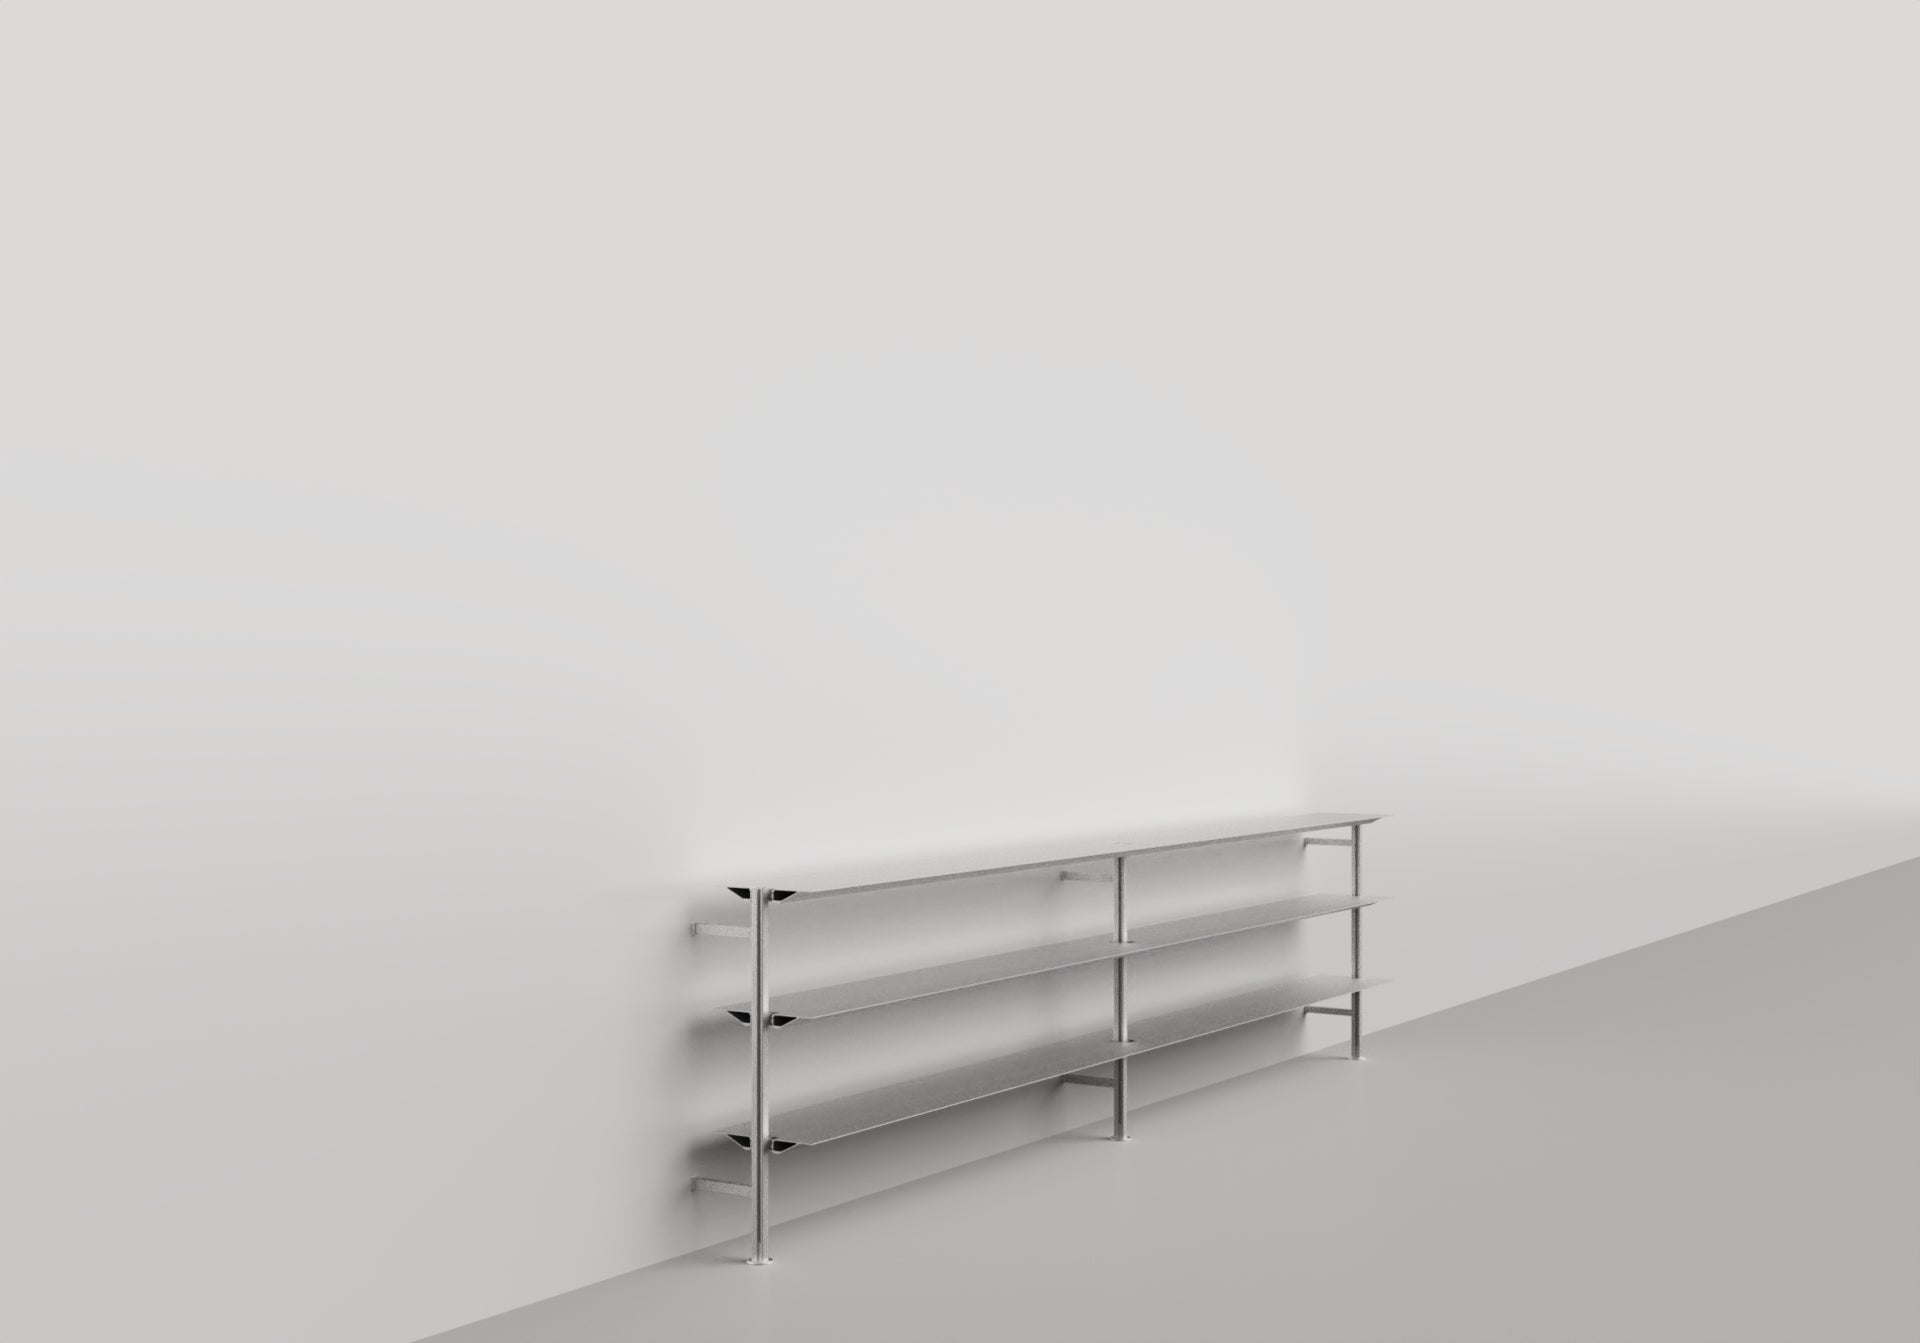 The Hypostila modular shelving unit was designed in 1979 by Lluis Clotet and Oscar Tusquets to support important amounts of weights on minimum profiles, reaching an infinity of lengths and planifications. It is constructed using extruded aluminium